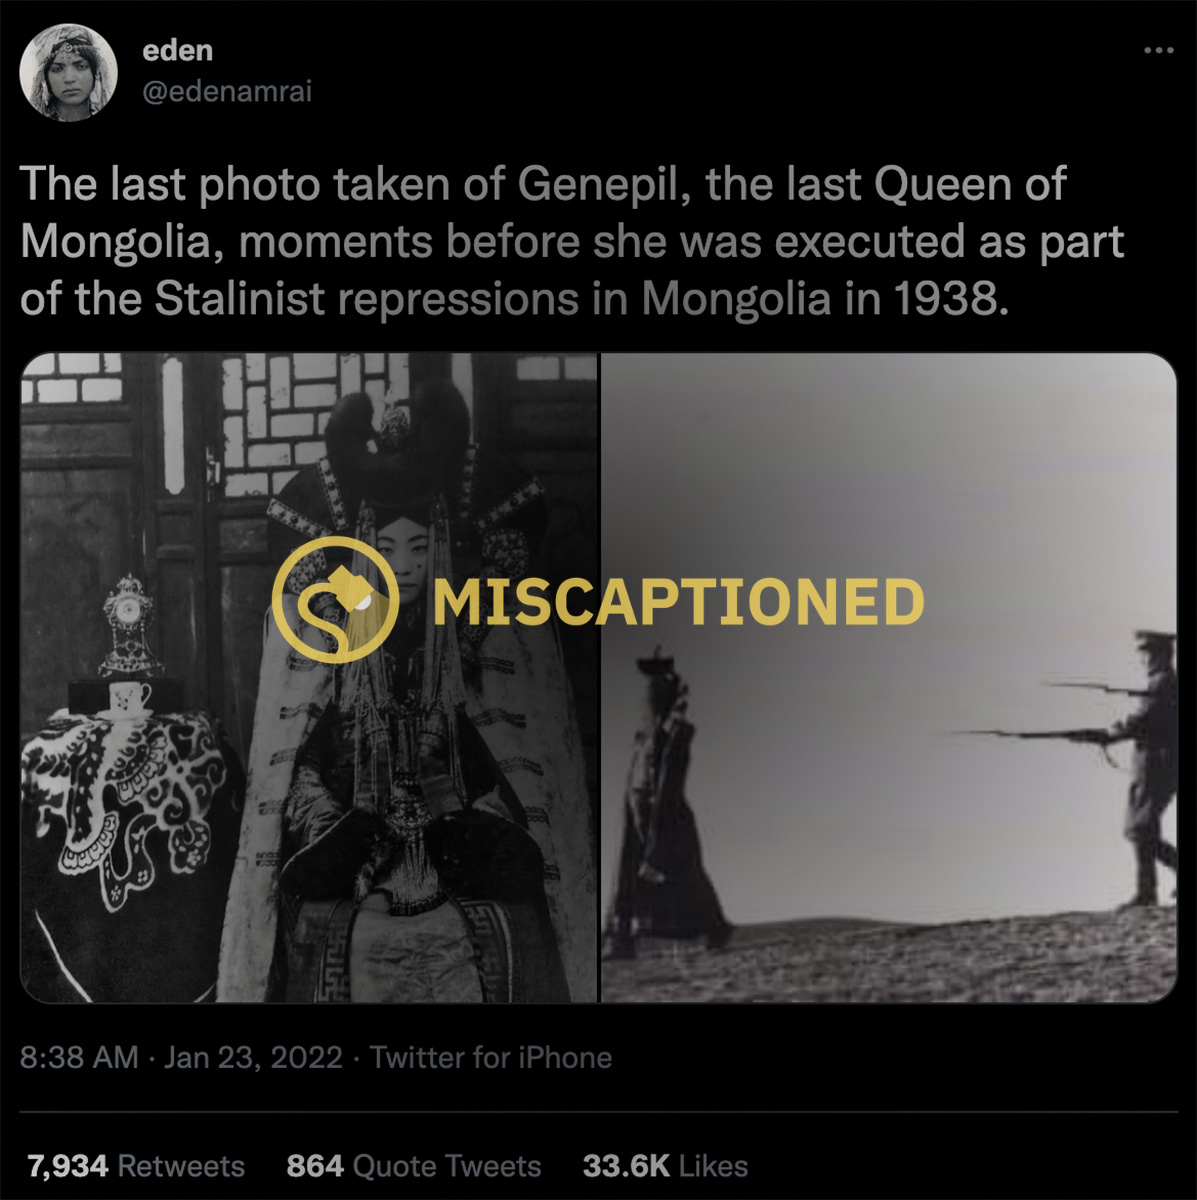 A photograph purportedly was the last photo taken of Genepil the last Queen of Mongolia moments before she was executed as part of the Stalinist repressions in Mongolia in 1938.